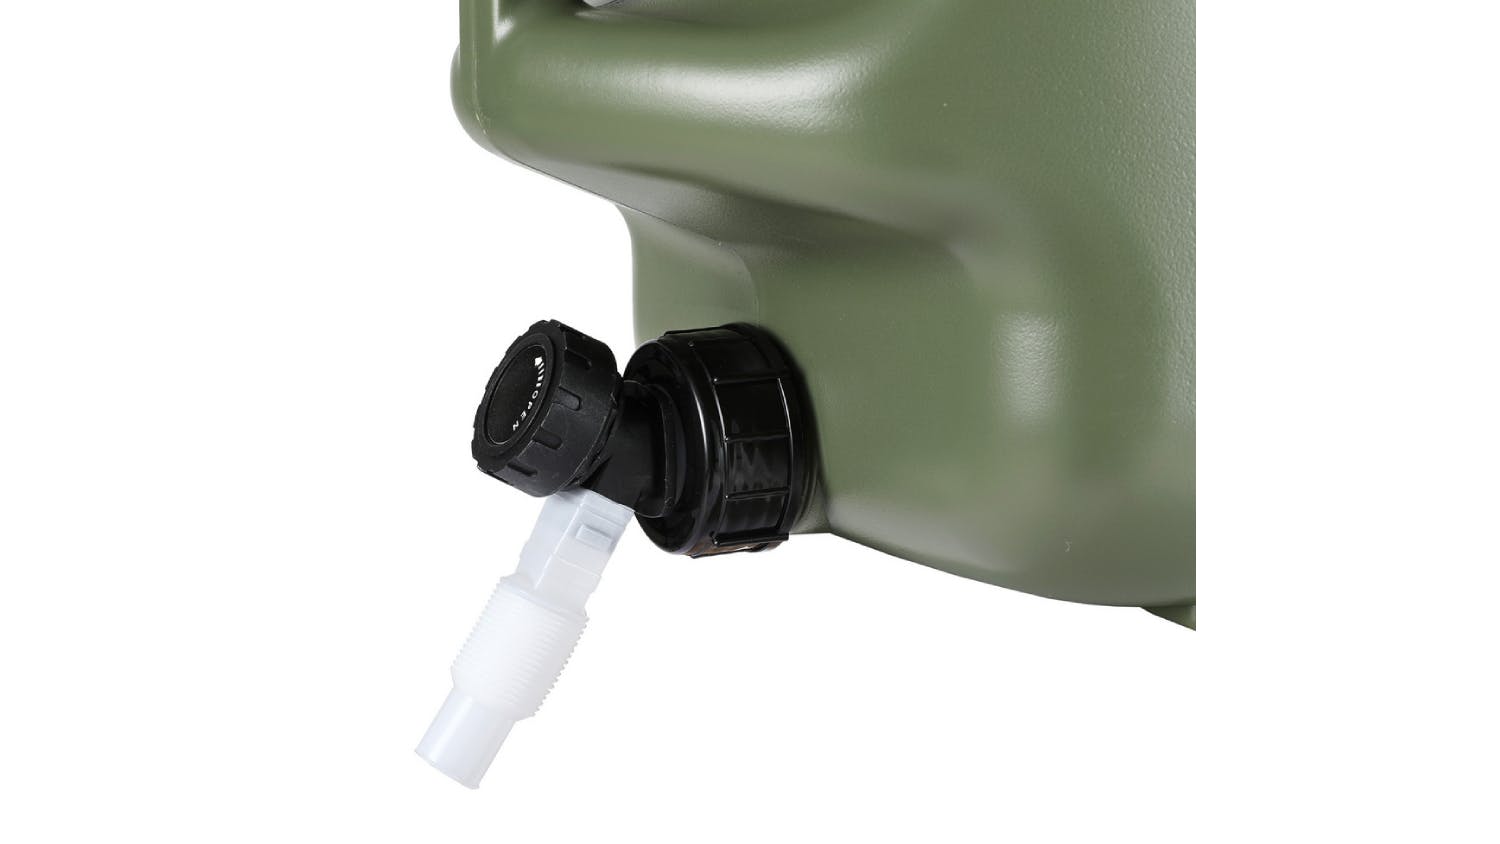 Weisshorn Sturdy Outdoor Water Cannister 25L with Spigot, Cleaning Brush - Camo Green